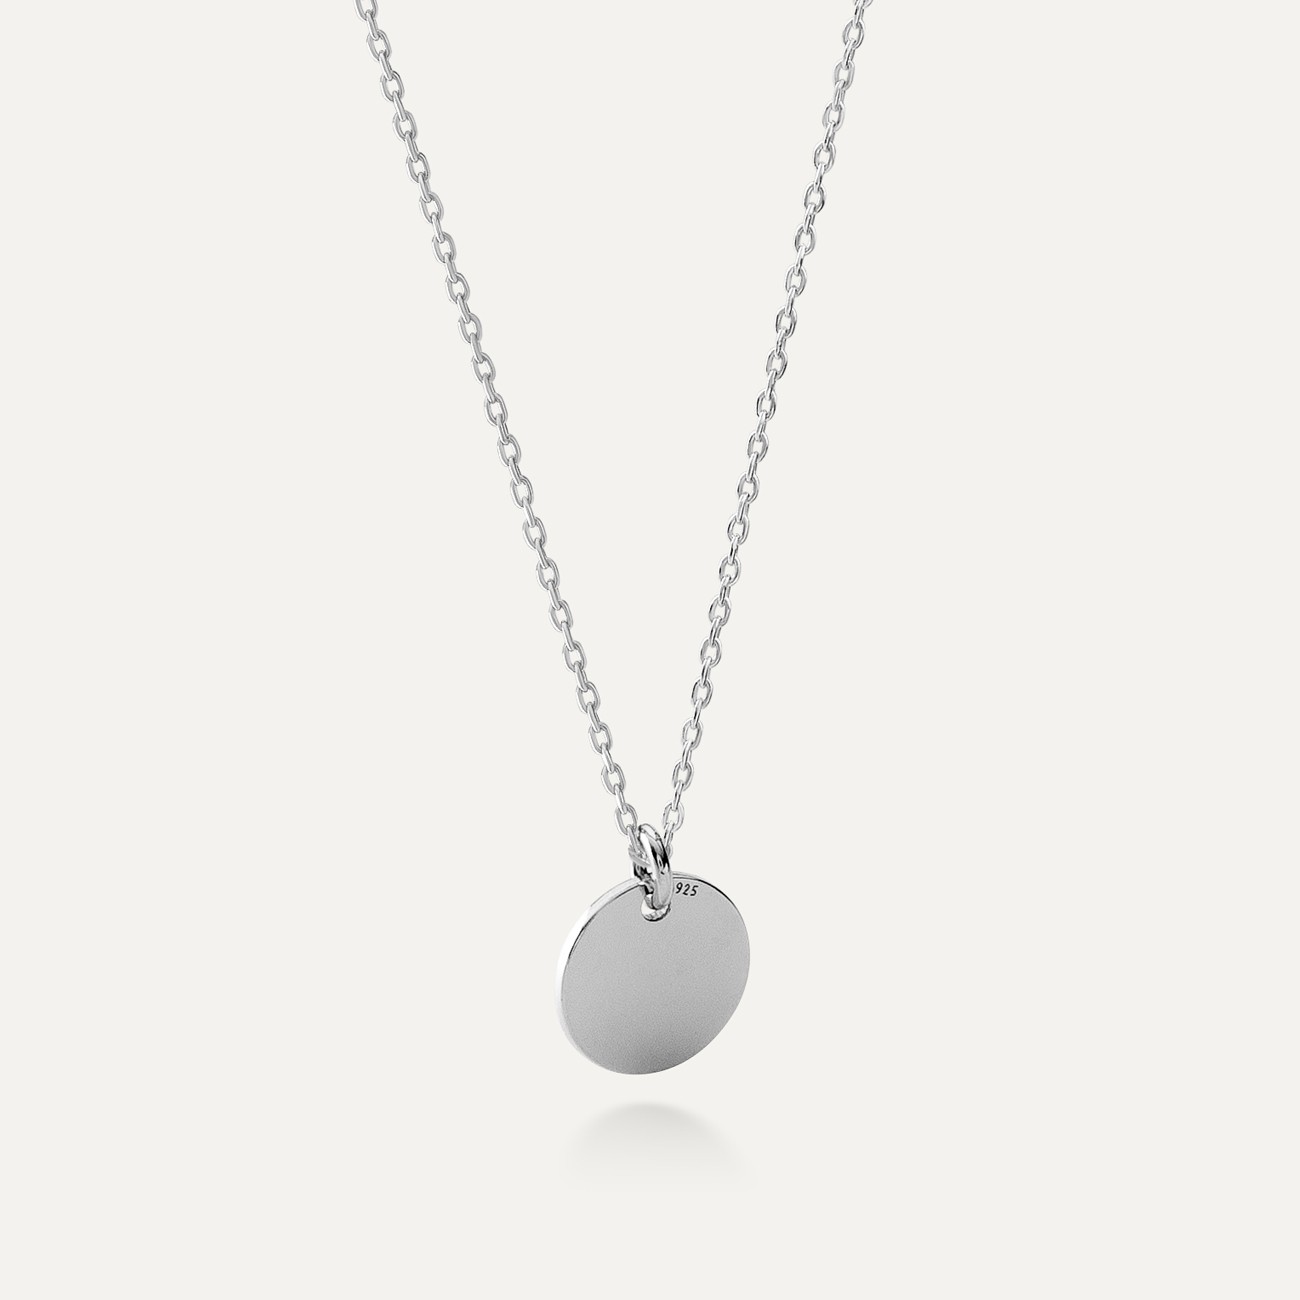 Round pendant necklace sterling silver 925